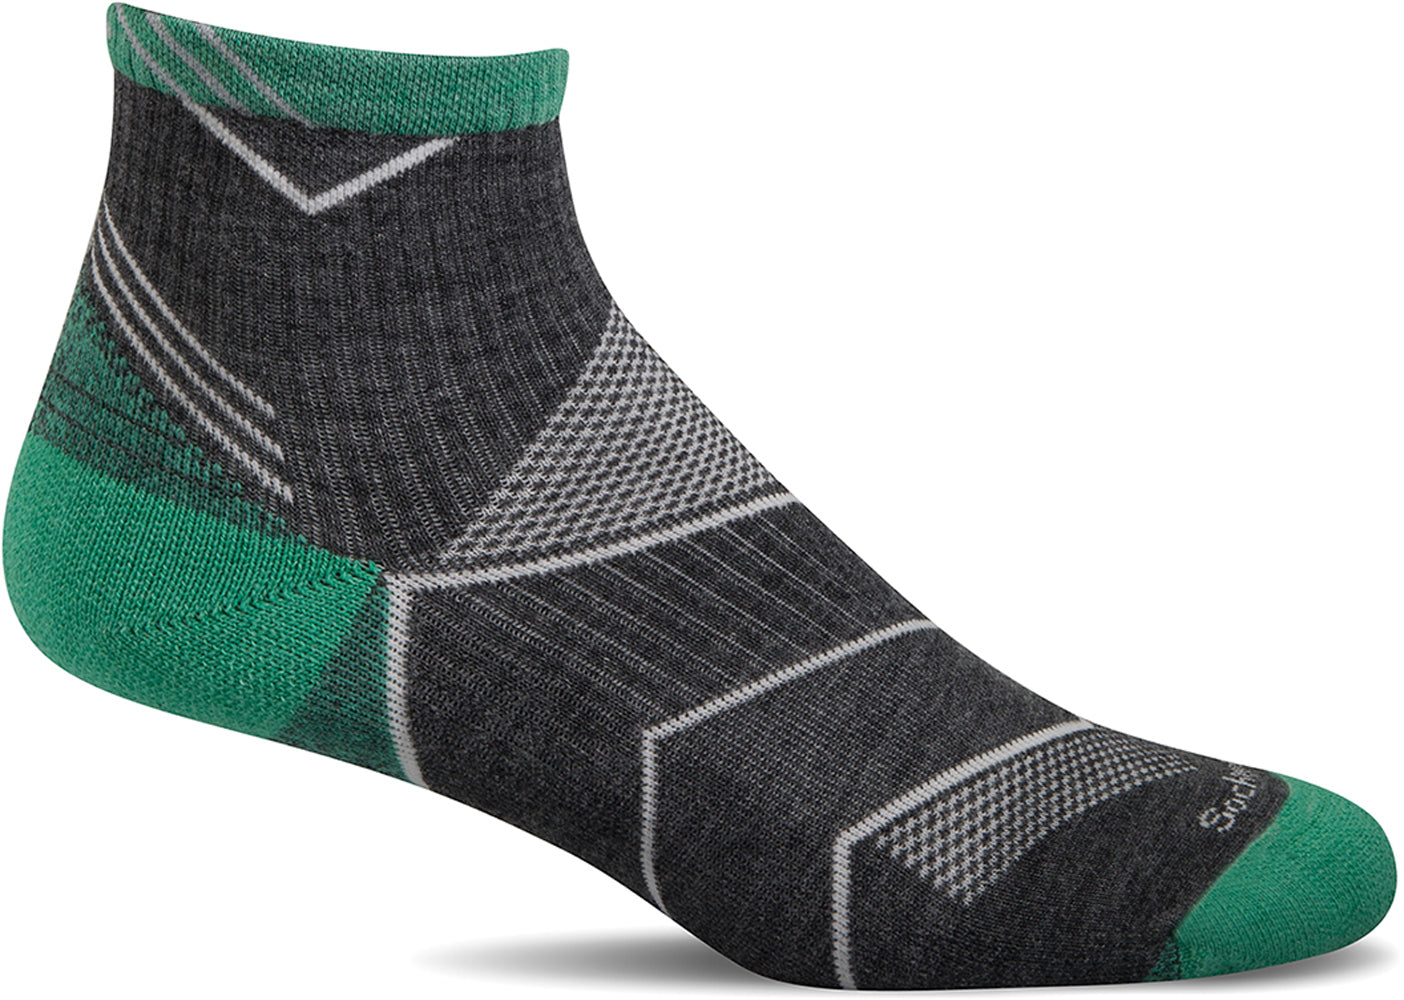 Sockwell Women's Incline Quarter Sock in Charcoal color from the side